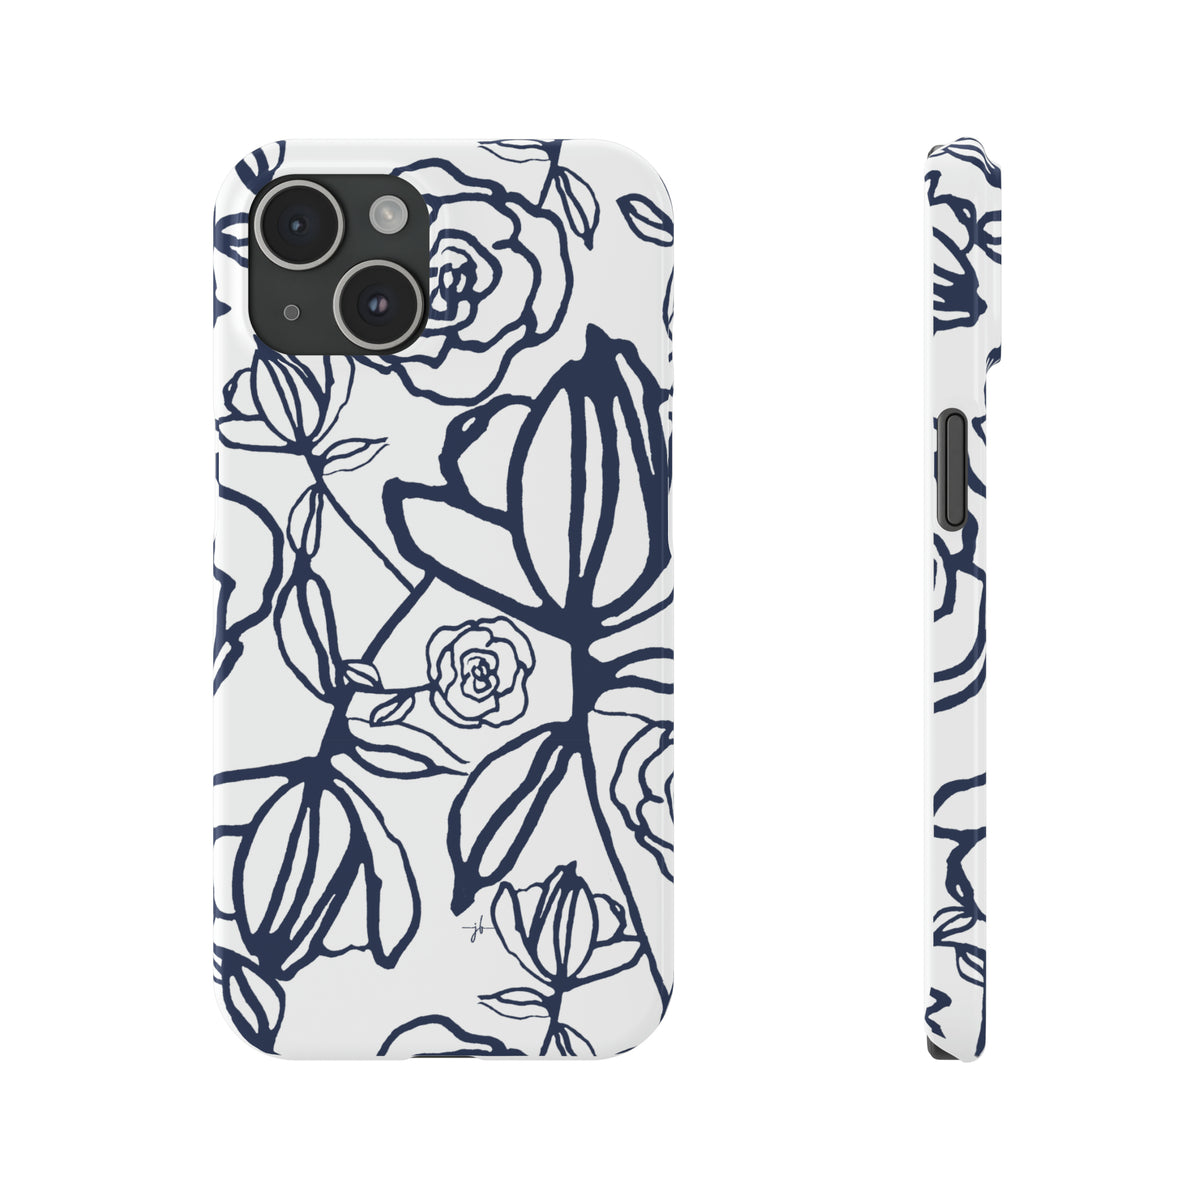 White iPhone case shown from front and side with dark blue rose line drawing in graphic style